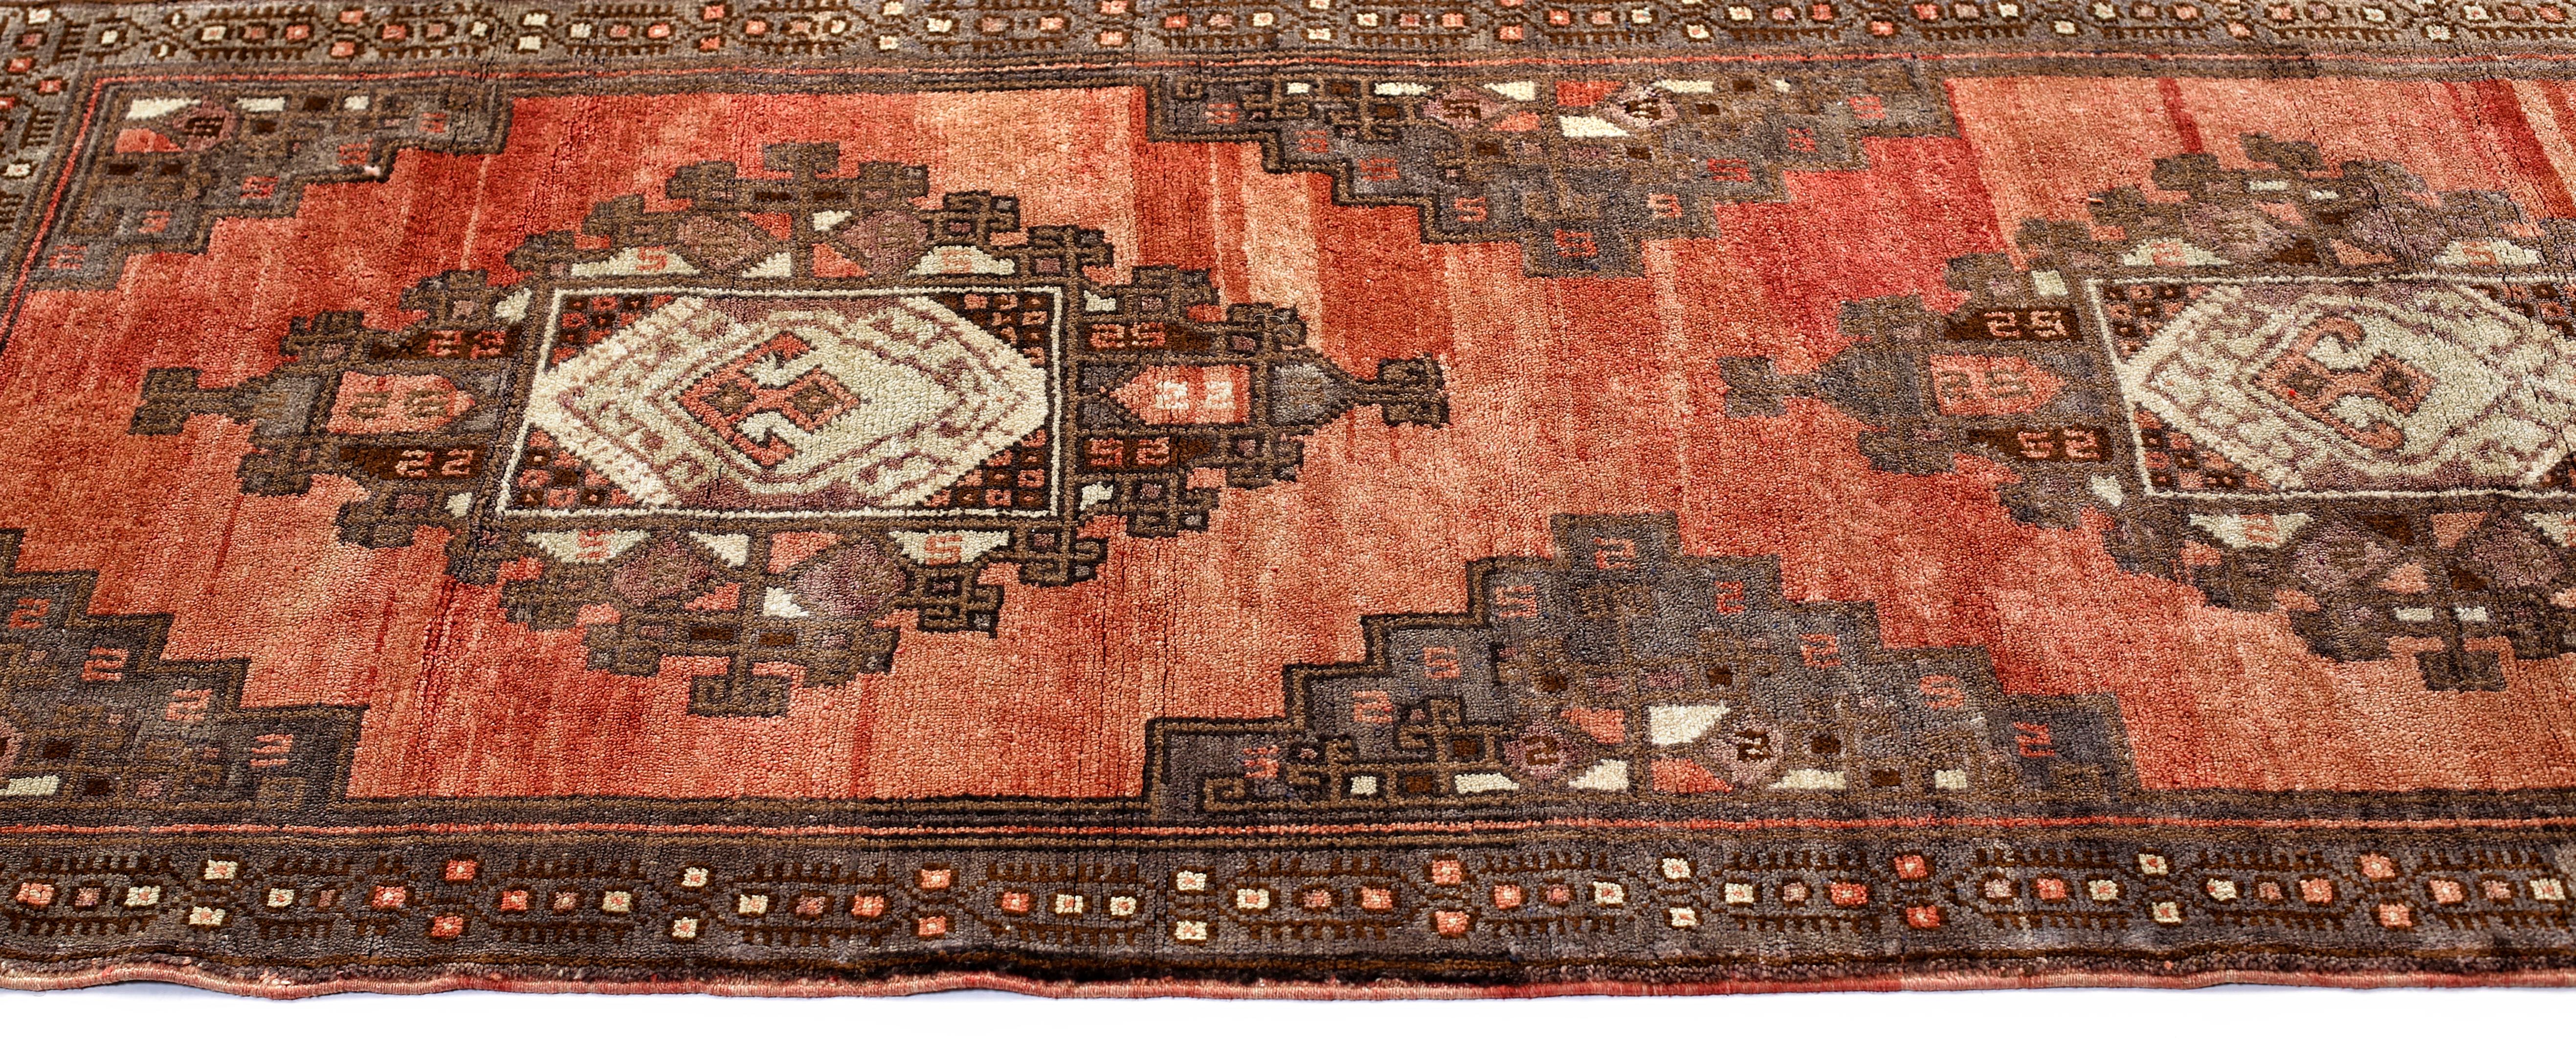 Anatolian rugs are hand knotted in the Central Anatolia or Asia Minor region of Turkey. The patterns are from ottoman era as well as modern Turkey. The central medallion used in this rug symbolizes the central authority of the ottoman sultans. In